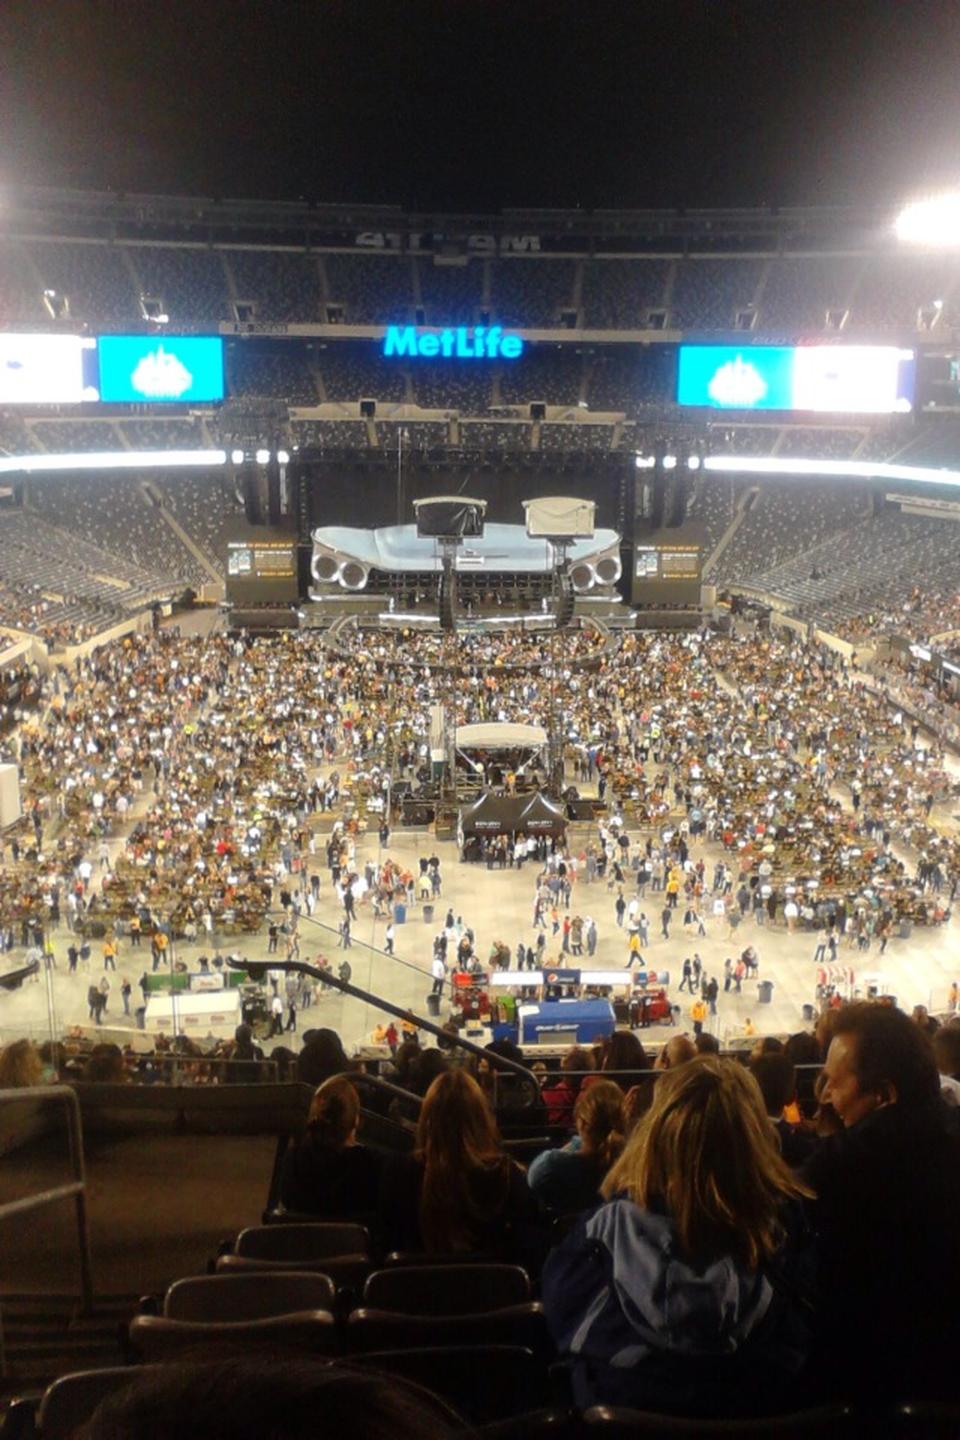 section 226 seat view  for concert - metlife stadium